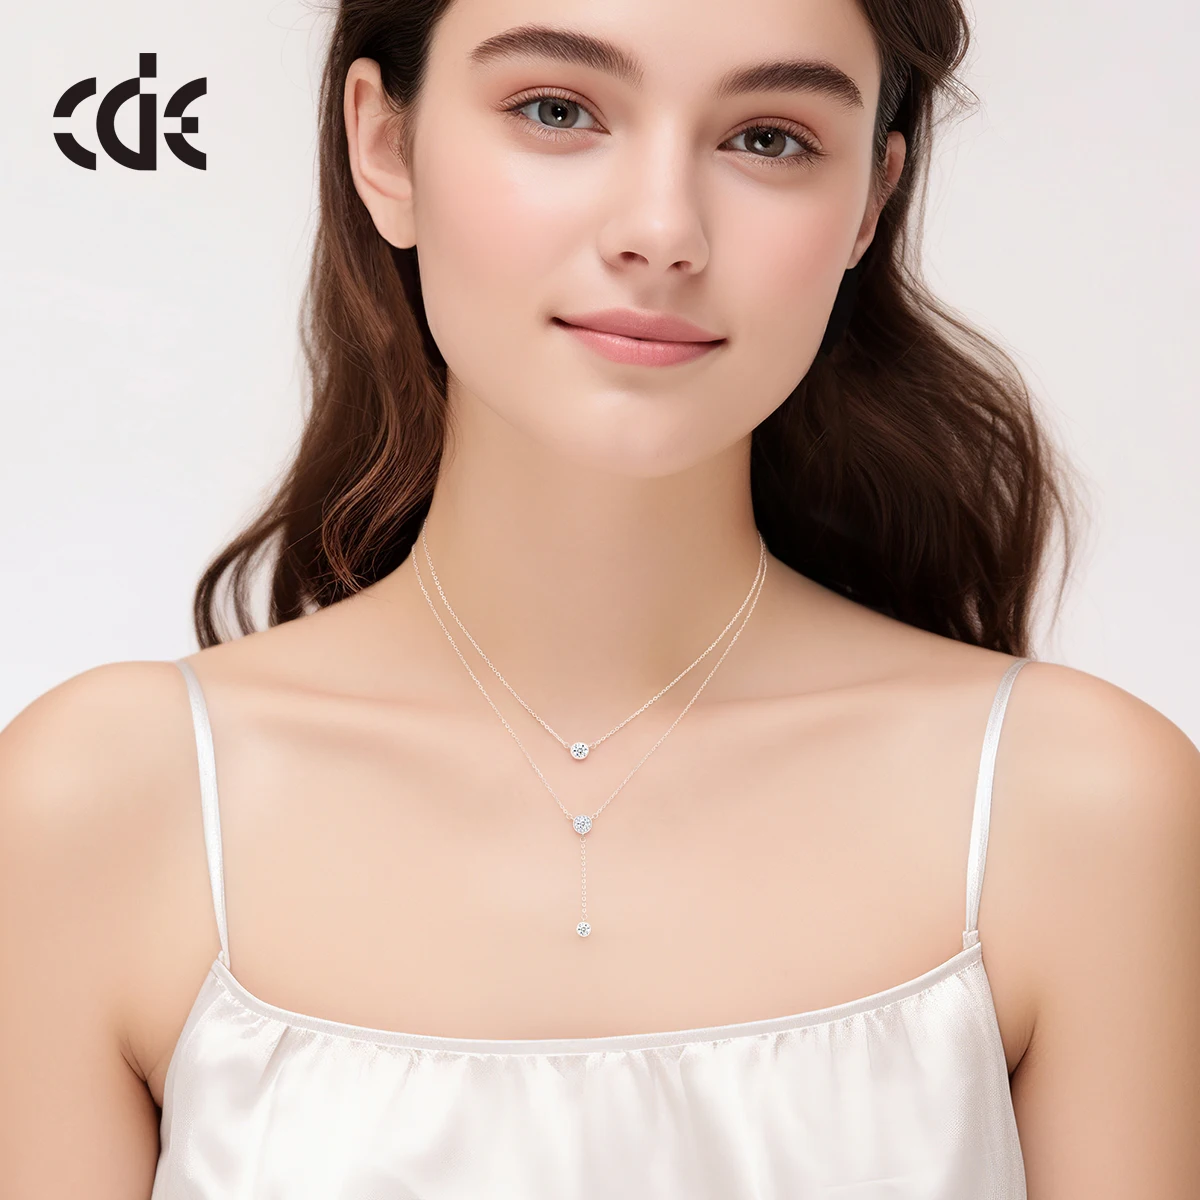 CDE CZYN064 Fine Jewelry 925 Sterling Silver Necklace Double Layer Chain Rhodium Plated Women Zircon Pendant Necklace